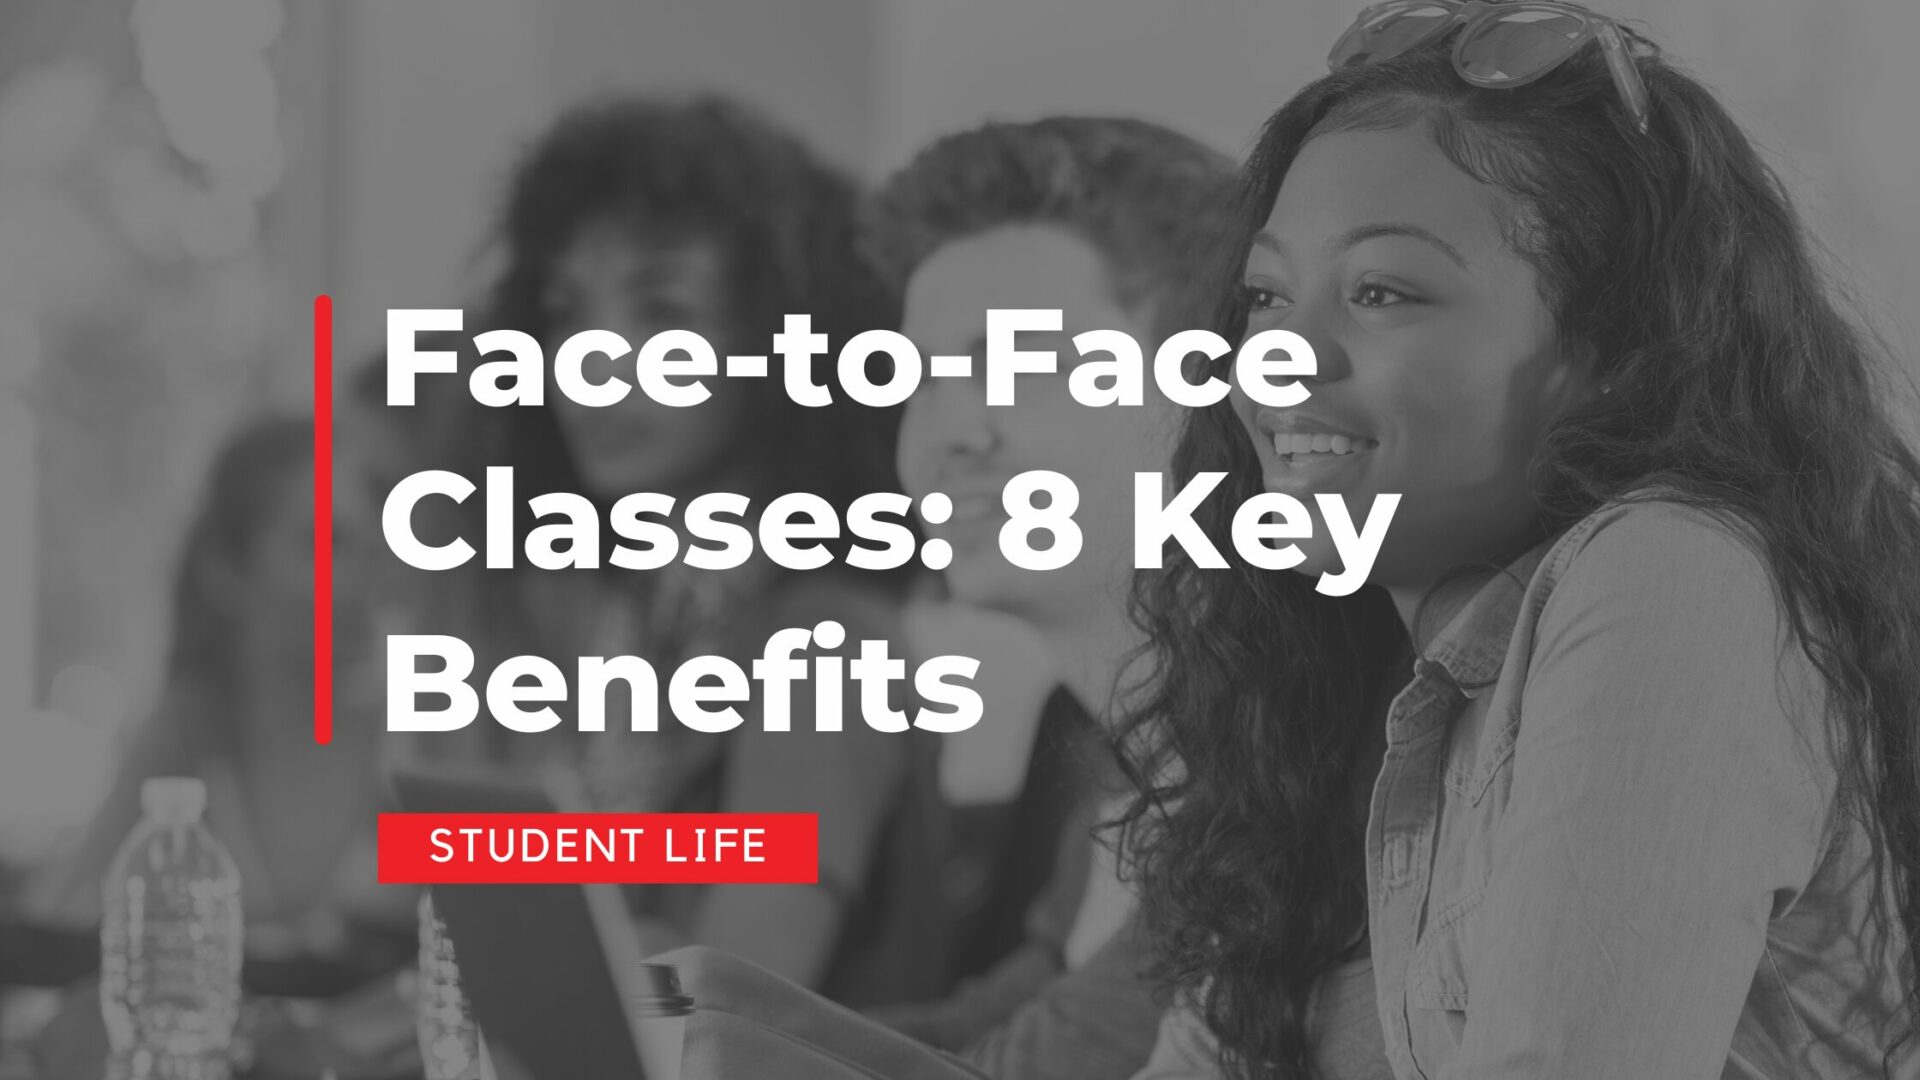 Face-to-Face Classes: 8 Key Benefits